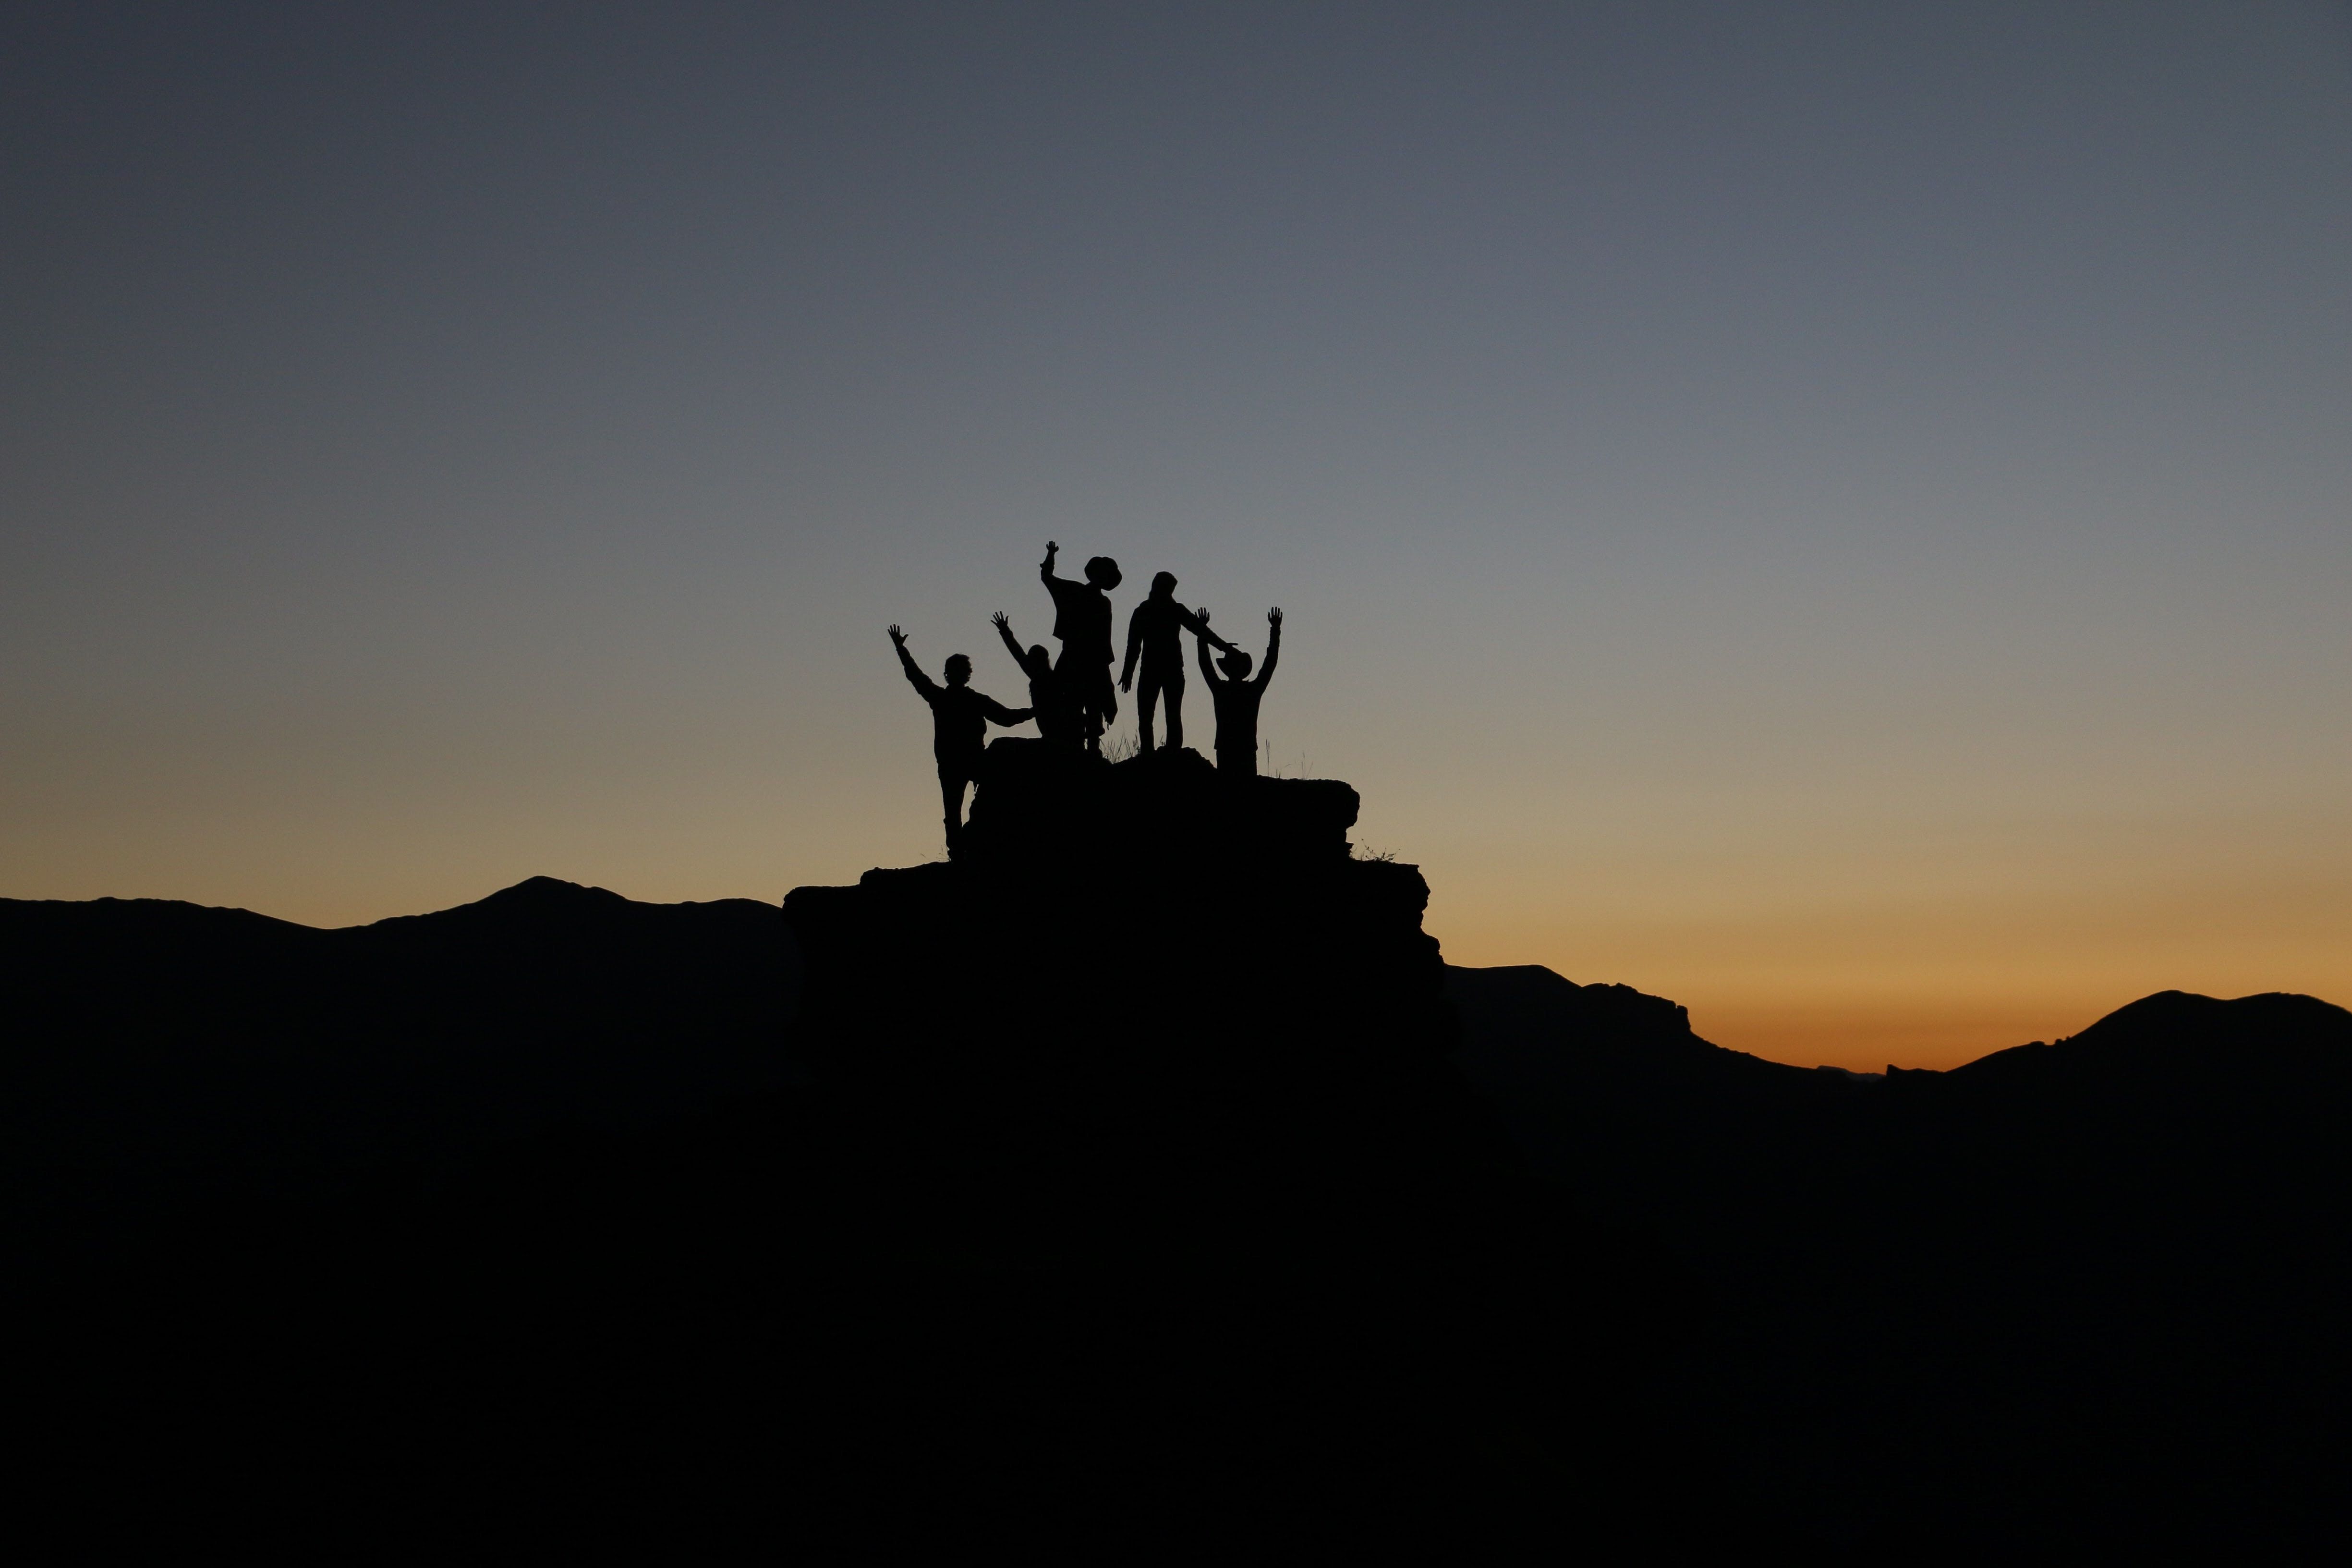 A group conquering a peak